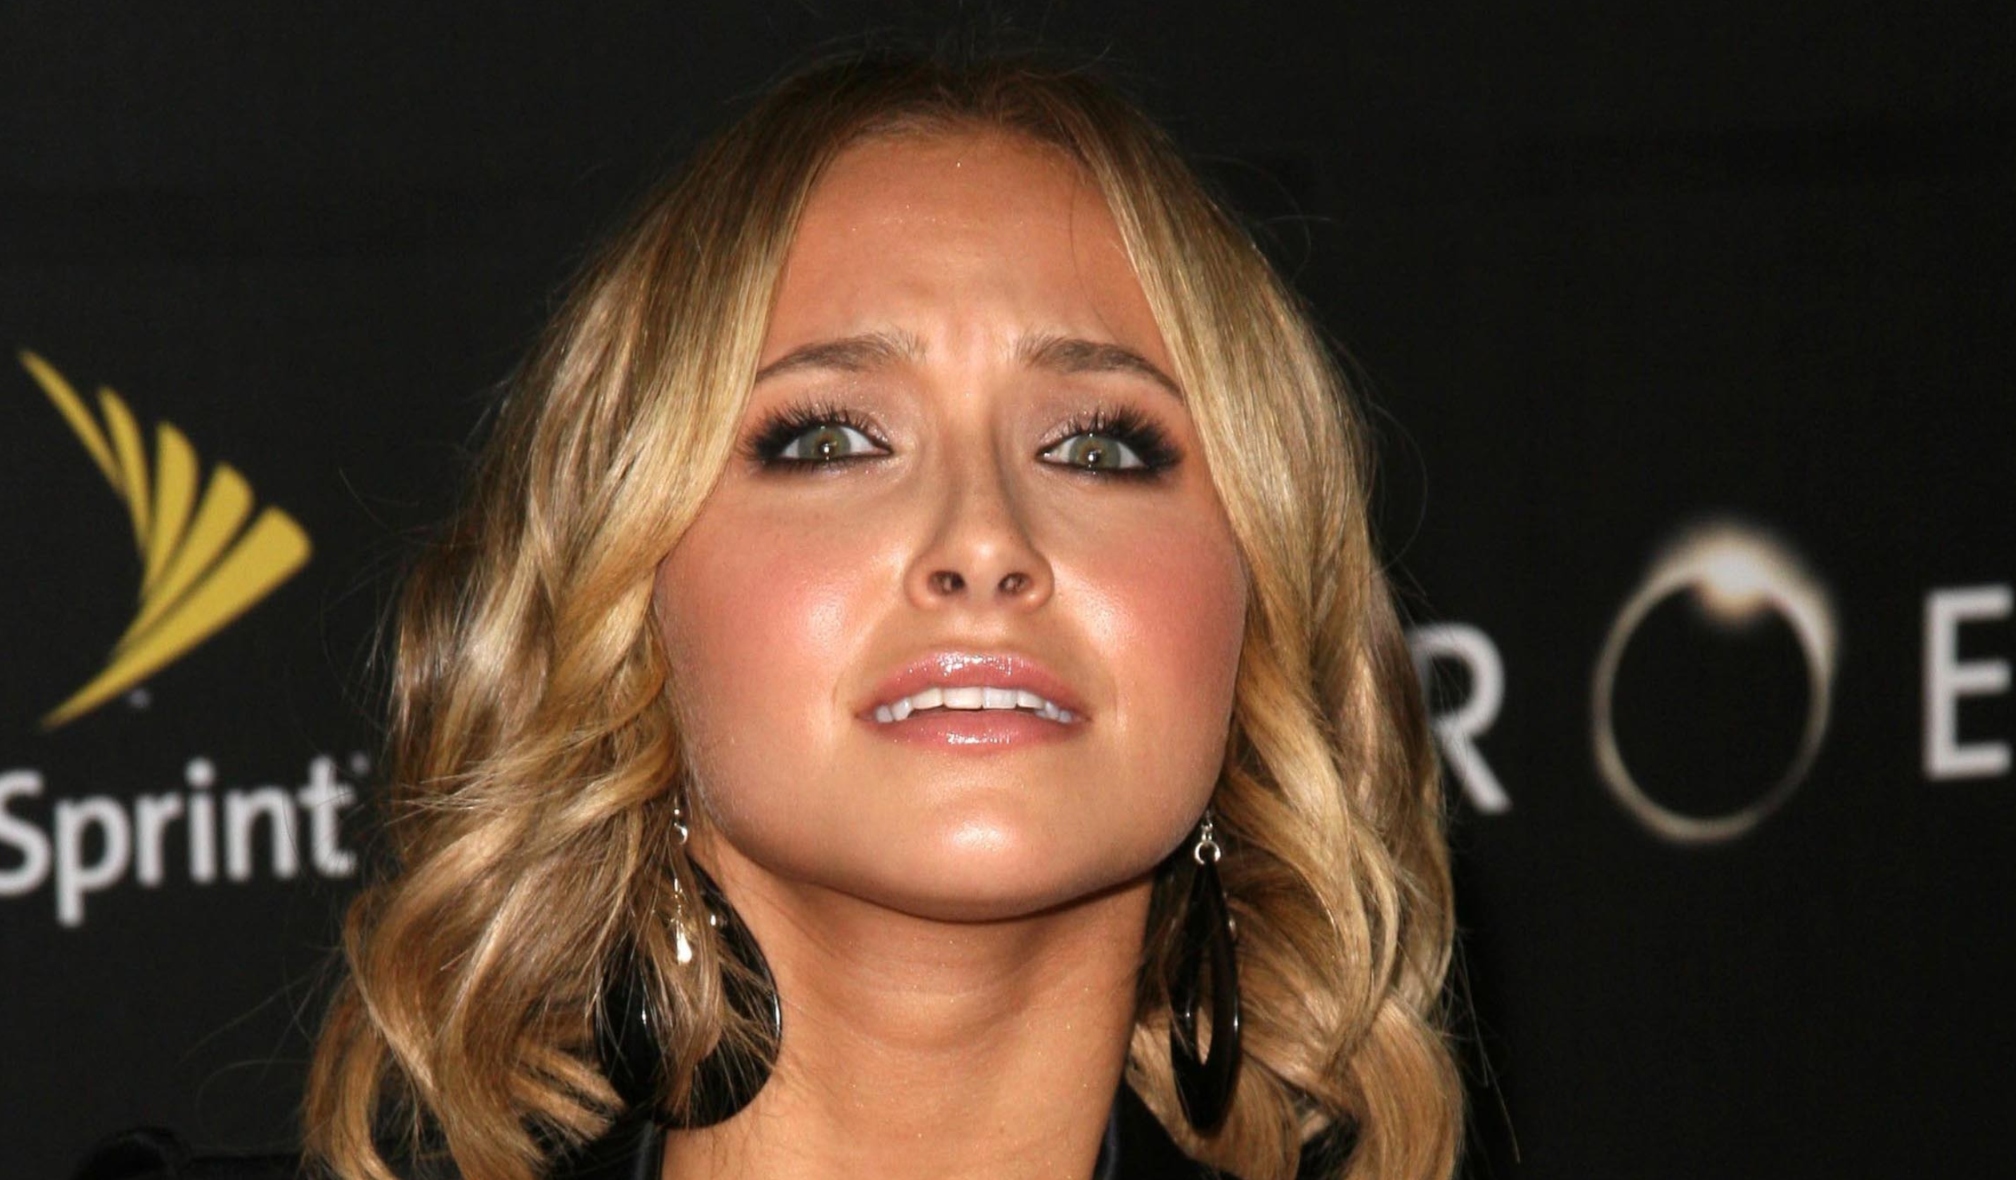 Hayden Panettiere Opens Up About Her Alcohol Addiction And How It Negatively Impacted Her Life